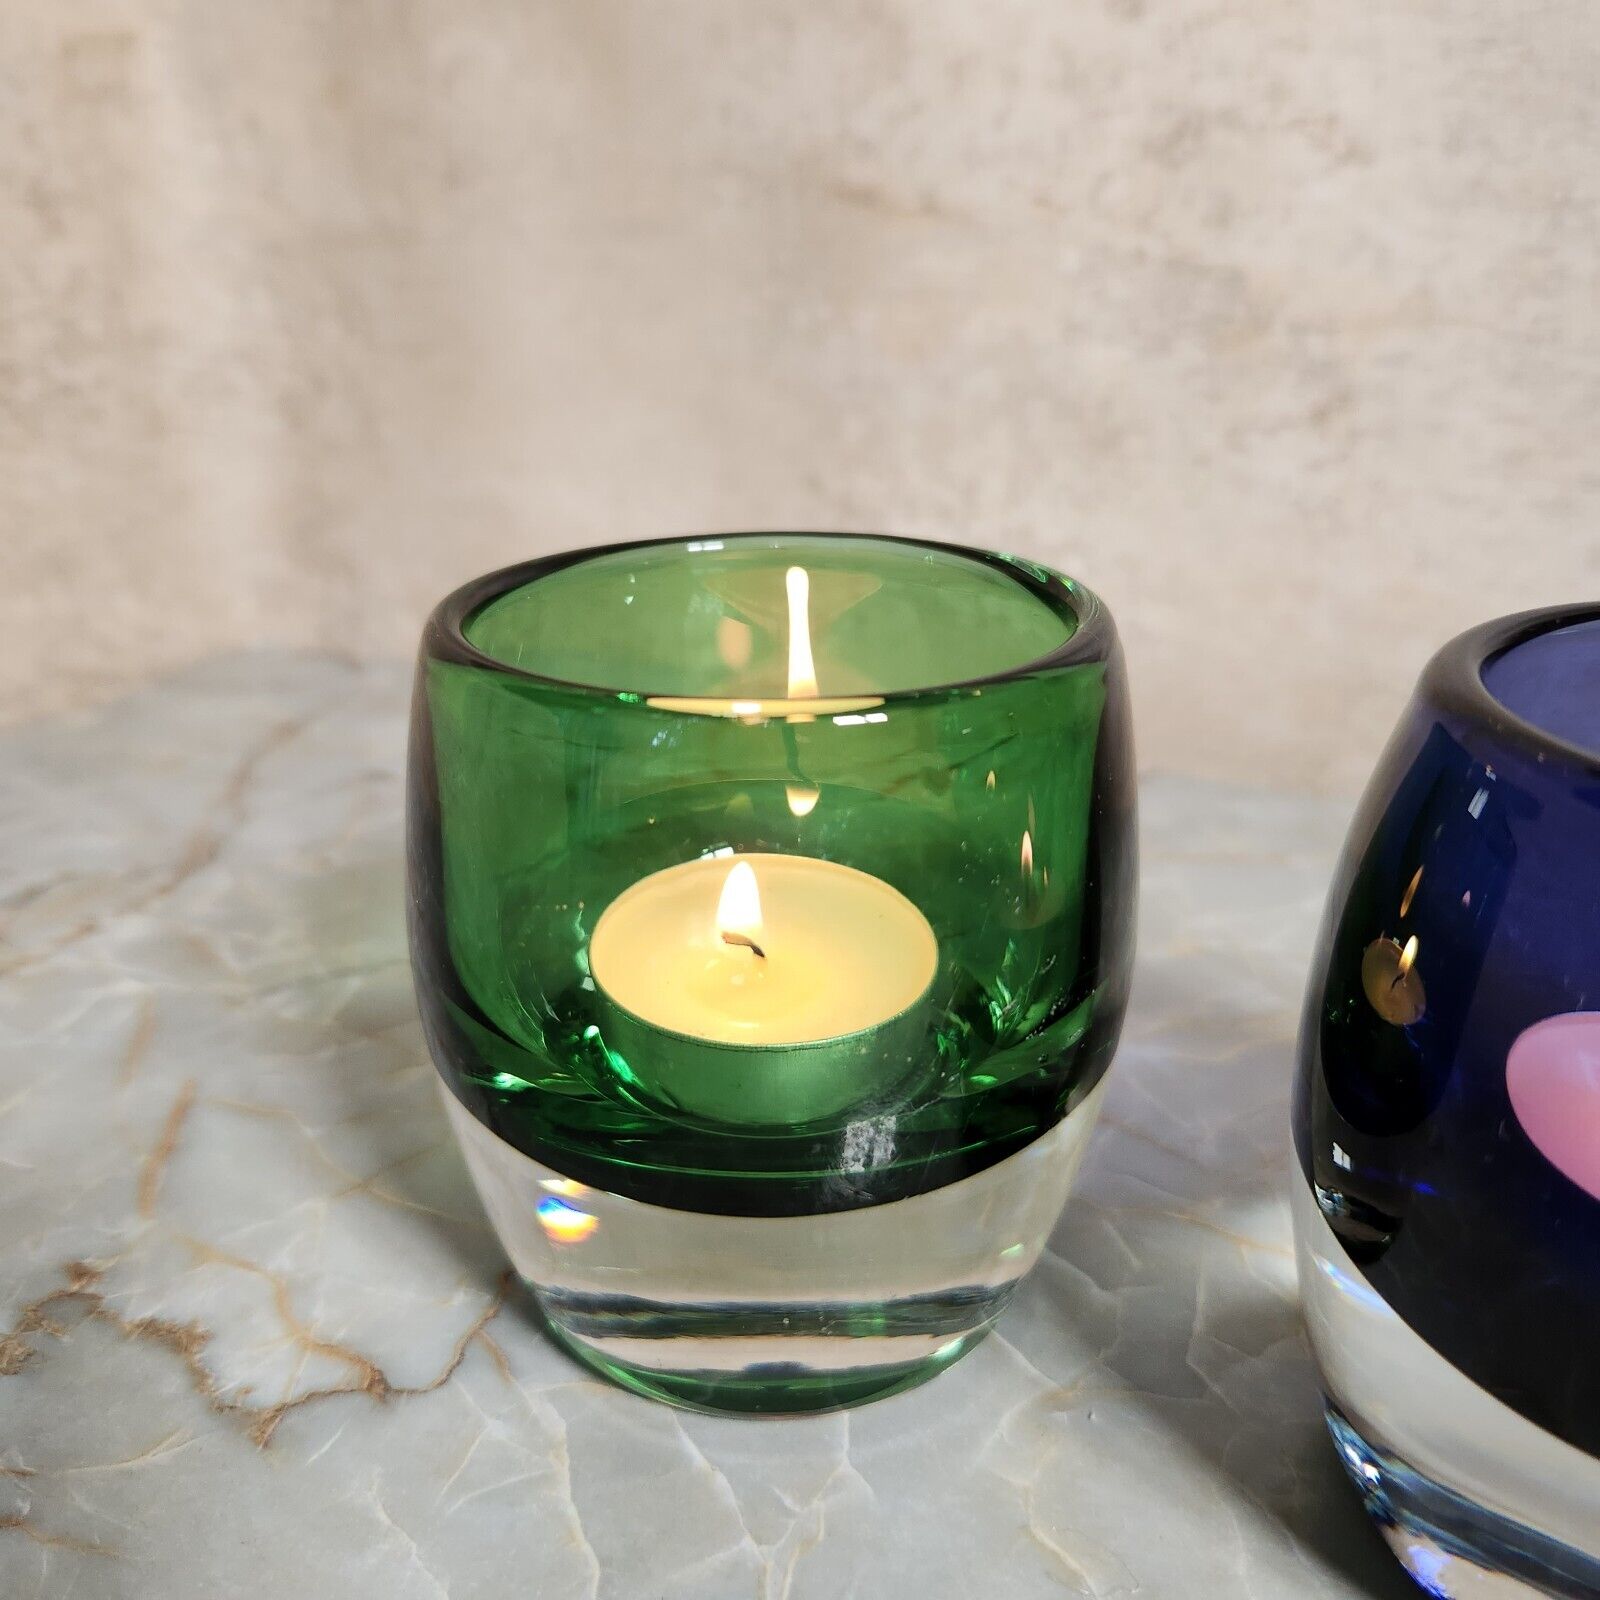 Lot of 2 CRATE & BARREL Diva Votive Candle Holders Green & Purple Poland Glass